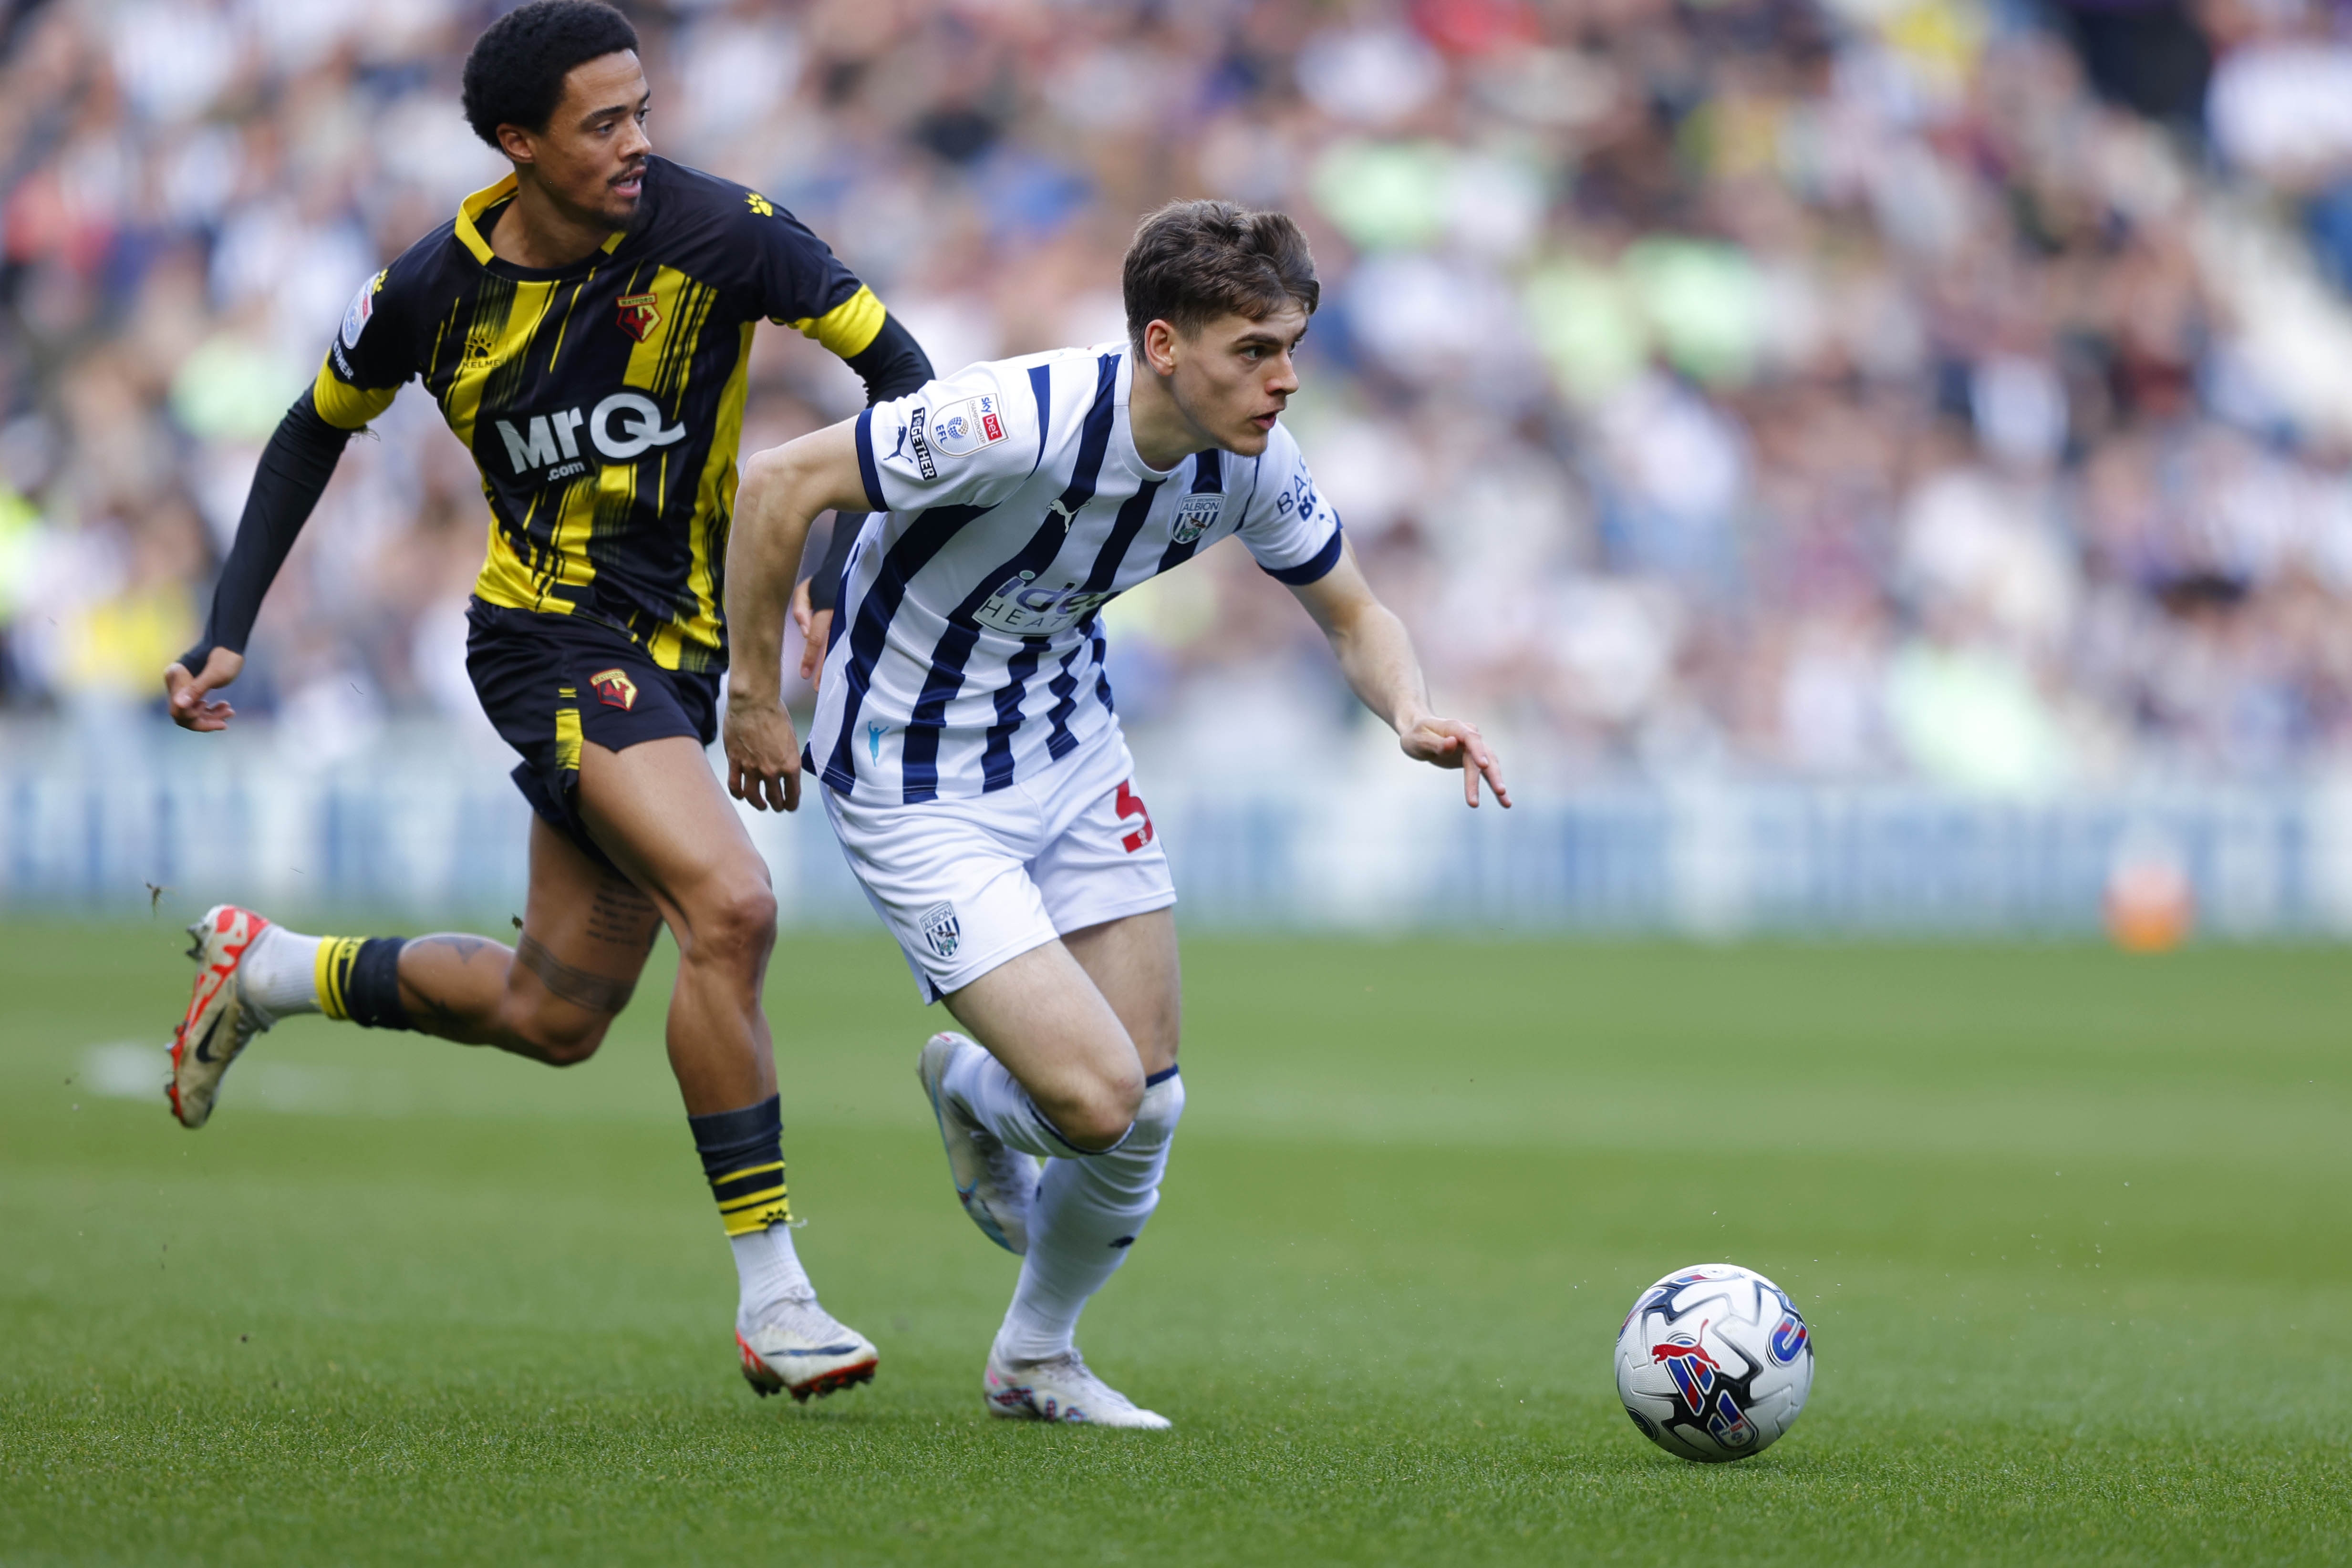 Tom Fellows running with the ball against Watford 